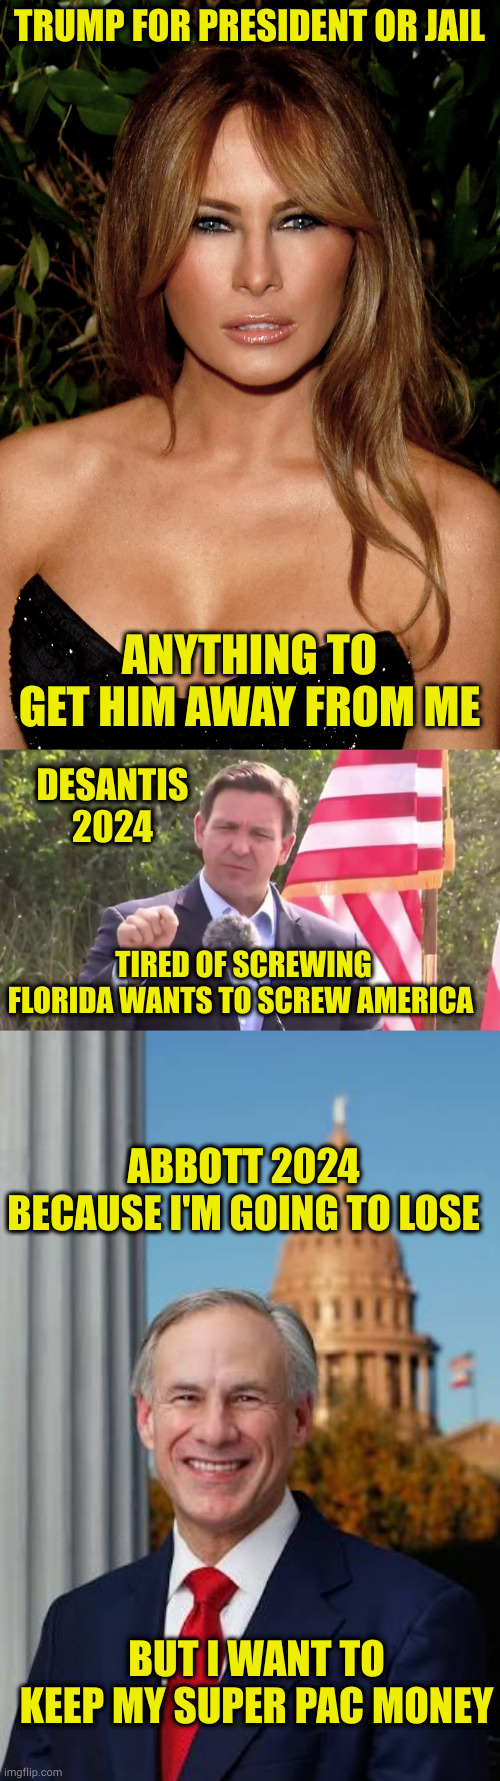 A preview of honest next election ads | TRUMP FOR PRESIDENT OR JAIL; ANYTHING TO GET HIM AWAY FROM ME; DESANTIS 2024; TIRED OF SCREWING FLORIDA WANTS TO SCREW AMERICA; ABBOTT 2024 BECAUSE I'M GOING TO LOSE; BUT I WANT TO KEEP MY SUPER PAC MONEY | image tagged in melania trump,florida governor ron desantis,gov greg abbott | made w/ Imgflip meme maker